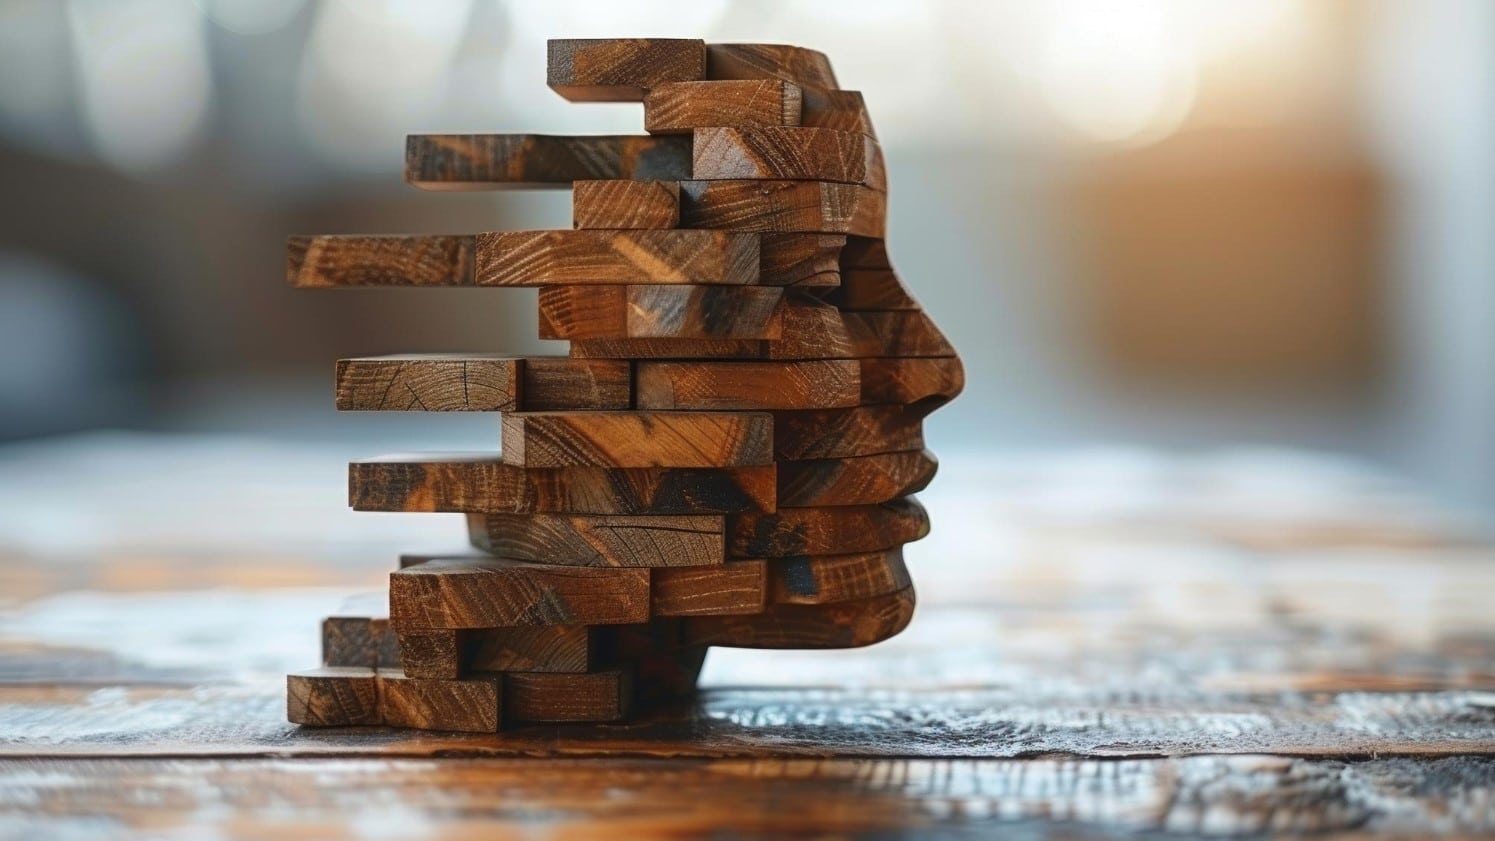 Creative Wooden Blocks Stacked in a Human Head Shape on Rustic Table